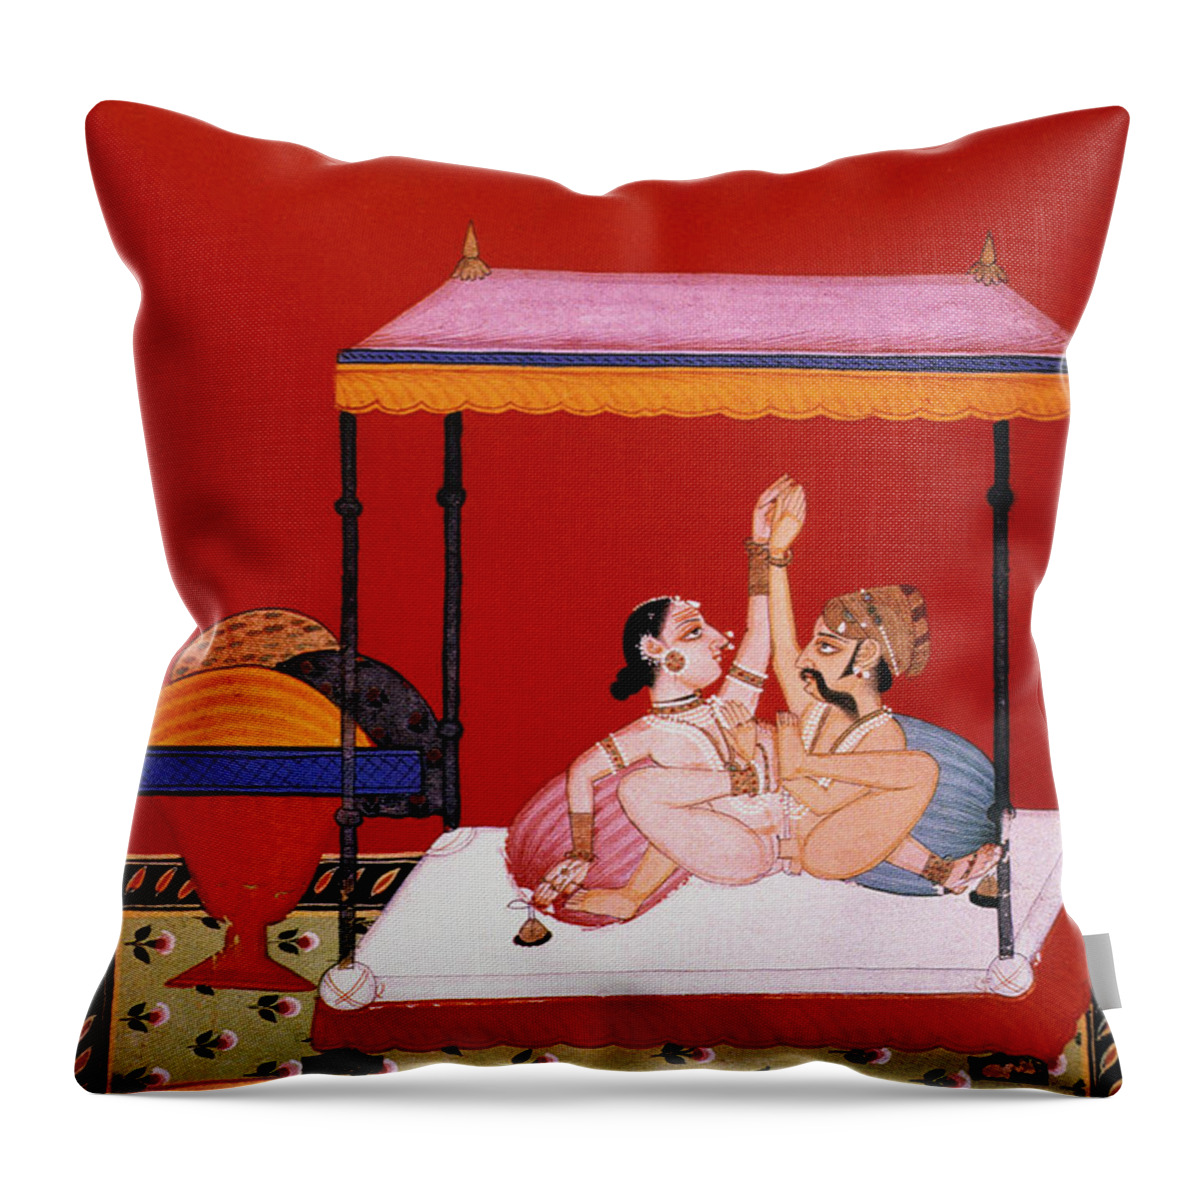 Asian Throw Pillow featuring the painting Kama Sutra by Vatsyayana